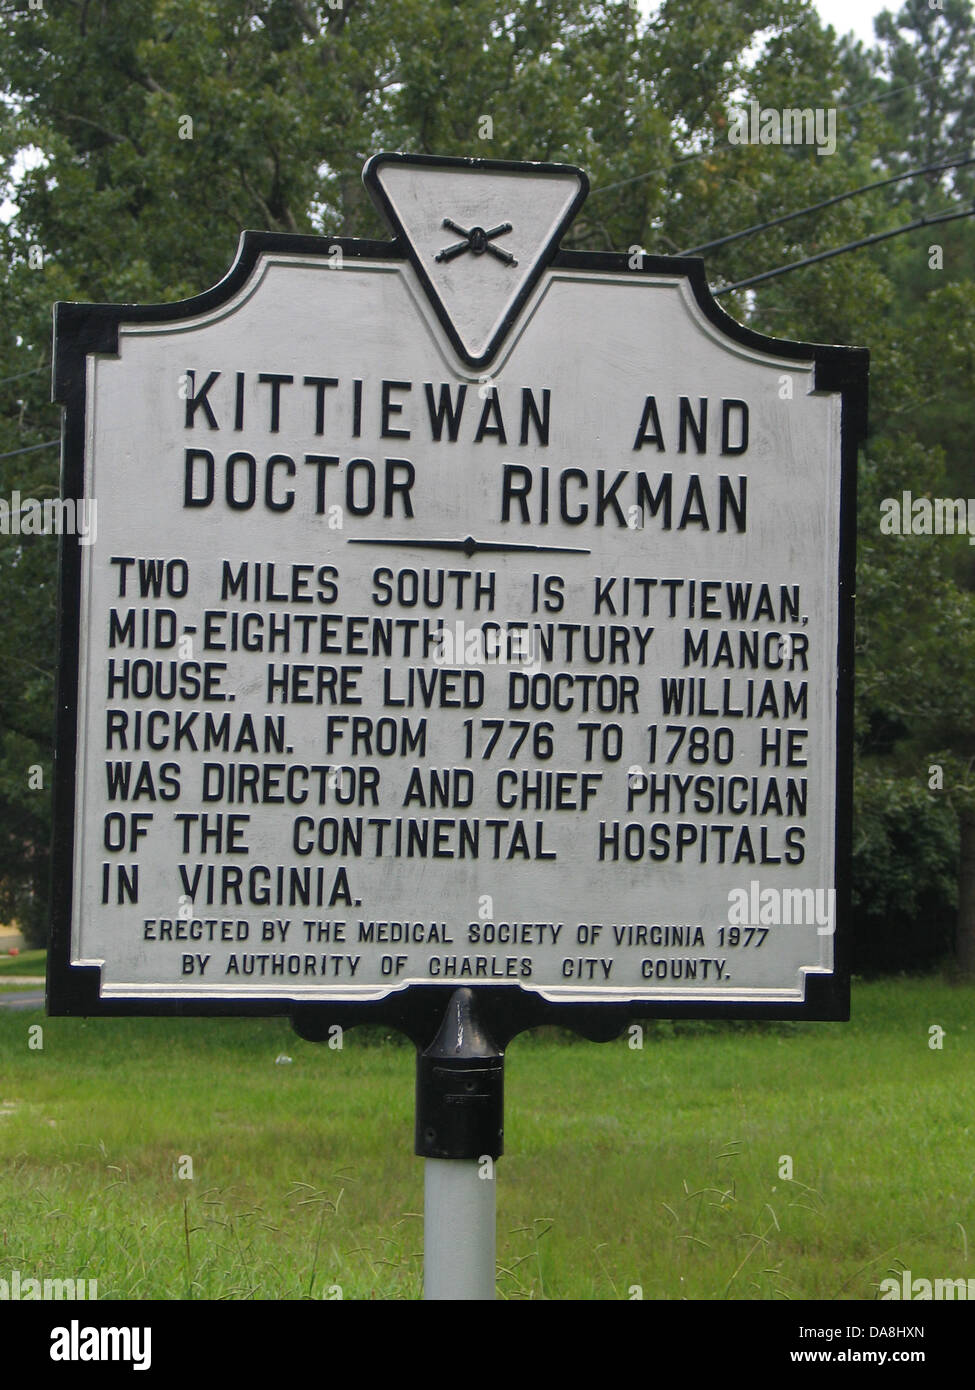 KITTIEWAN AND DOCTOR RICKMAN Two miles south is Kittiewan, mid-eighteenth century manor house. Here lived Doctor William Rickman. From 1776 to 1780 he was director and chief physician of the continental hospitals in Virginia. Erected by the Medical Society of Virginia, 1977 by authority of Charles City County. Stock Photo